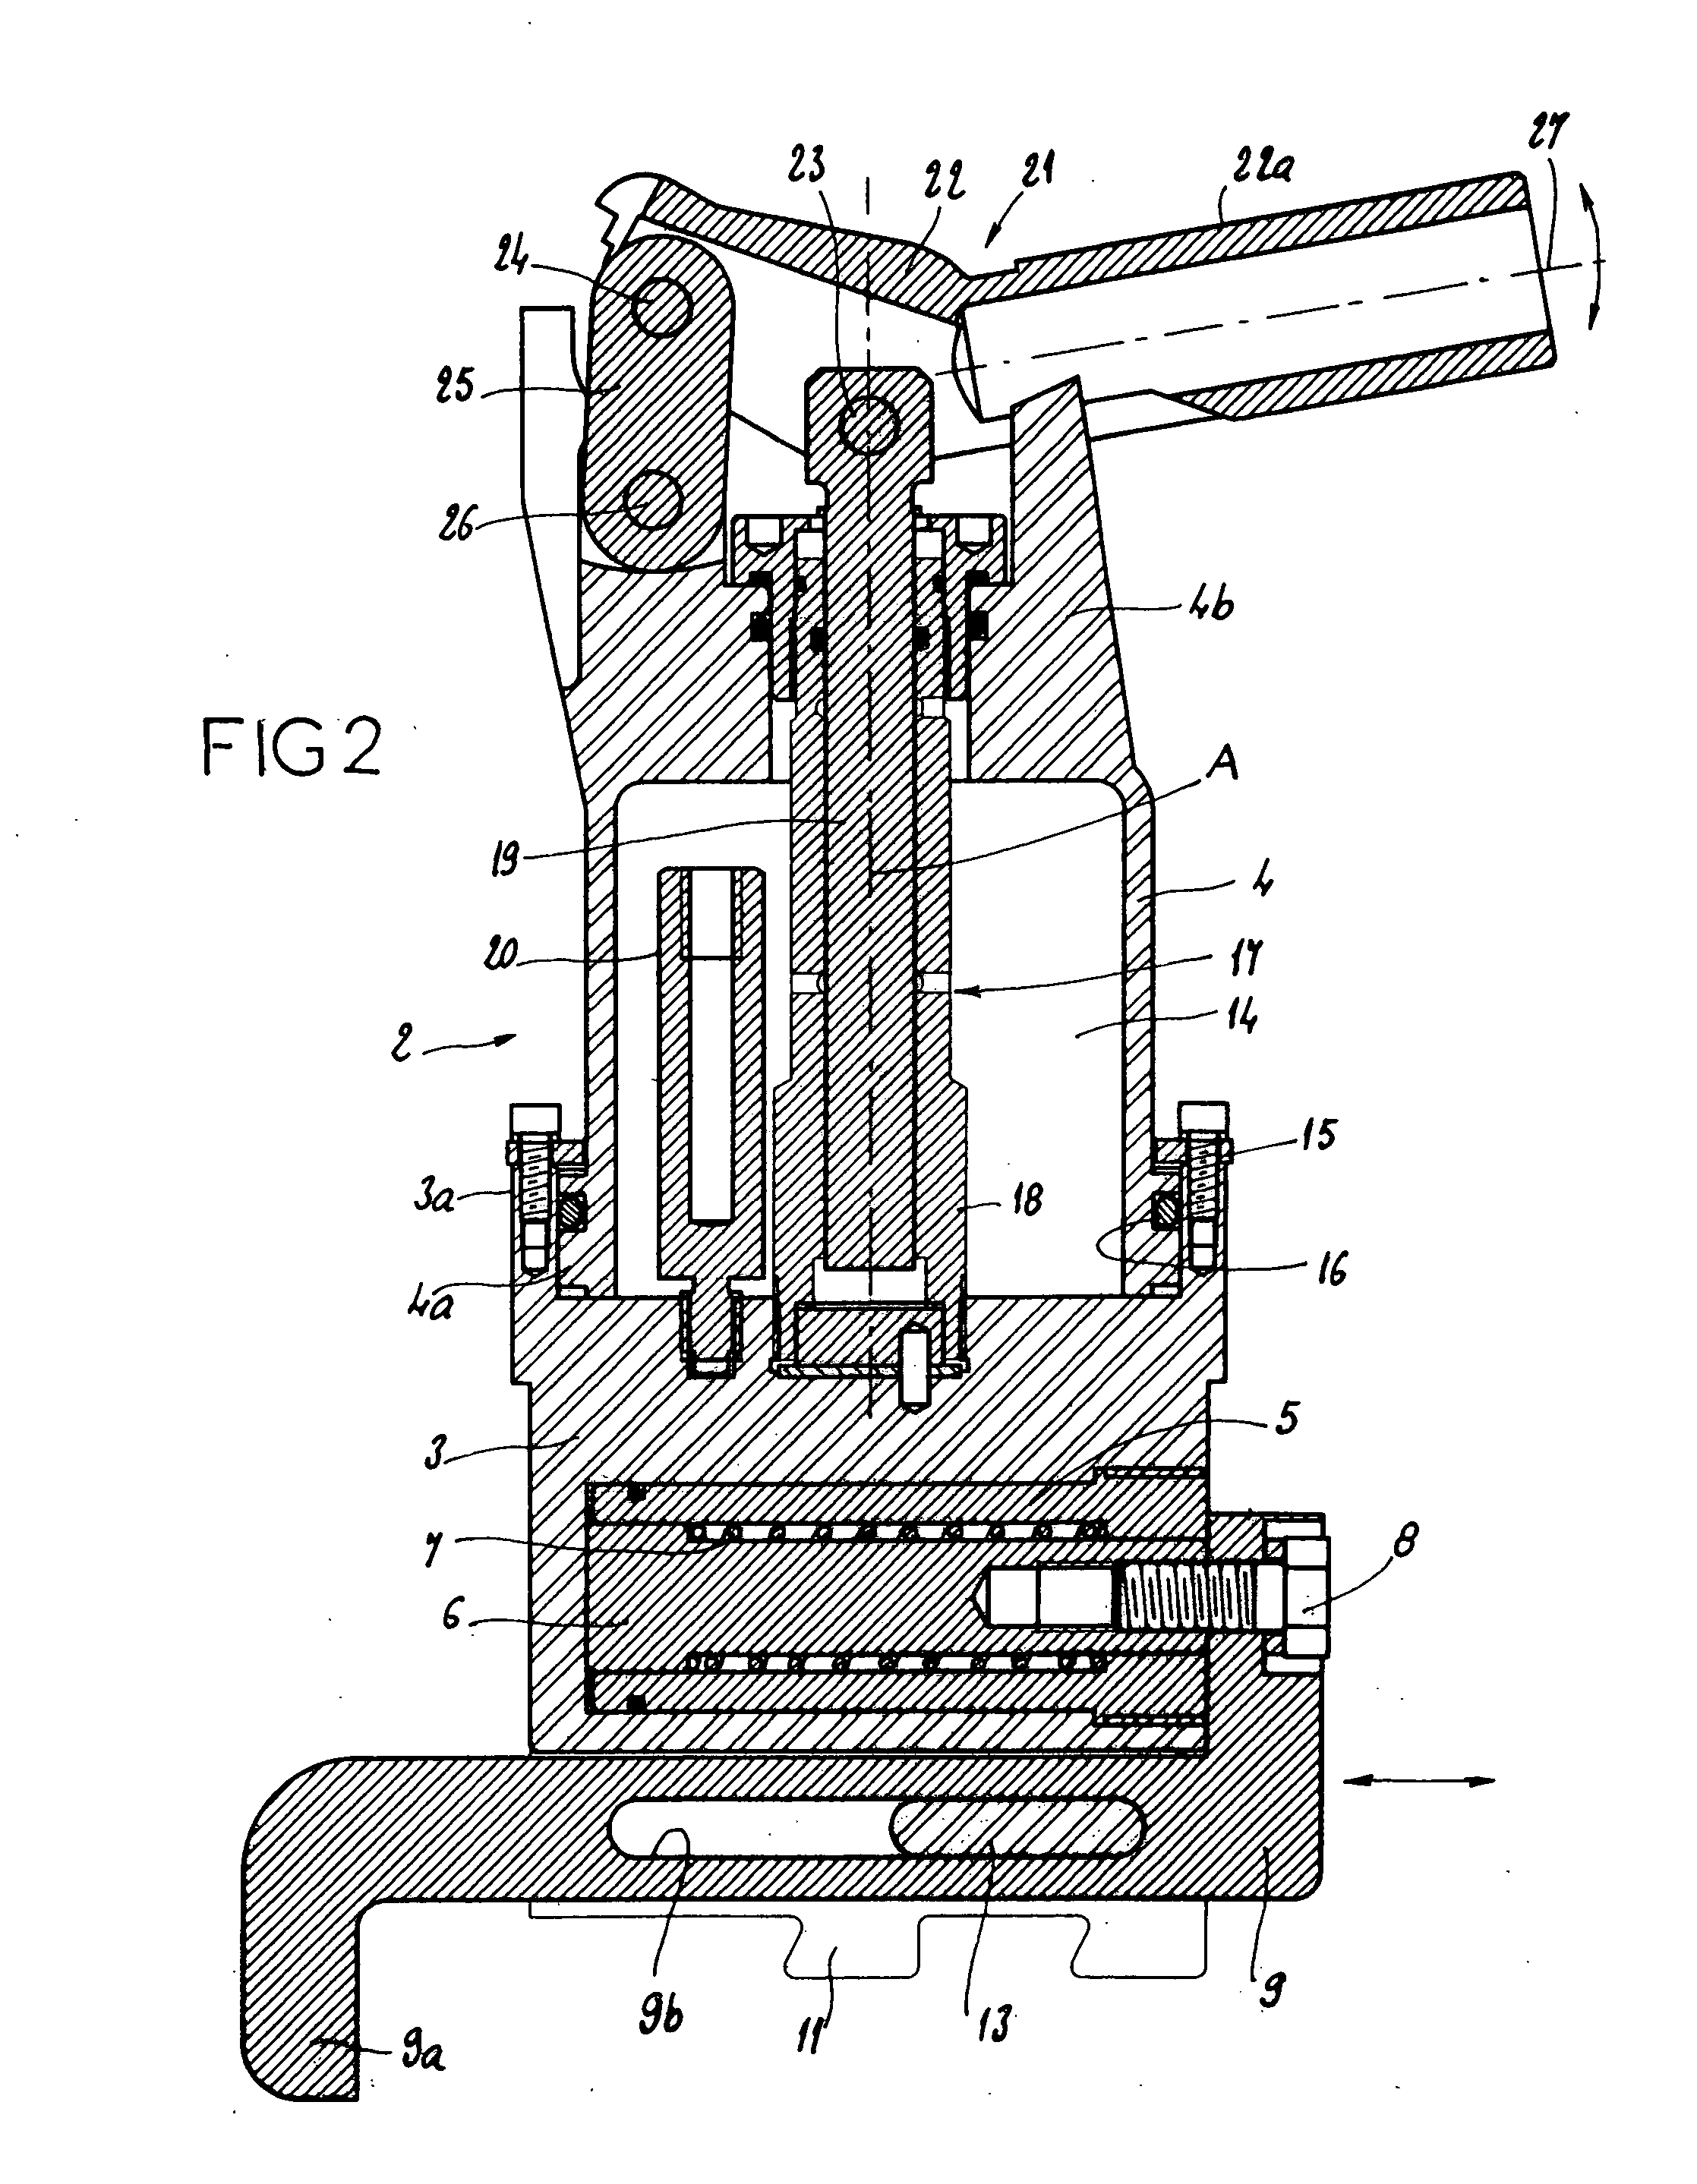 Hand tool for inserting and removing rail fastenings